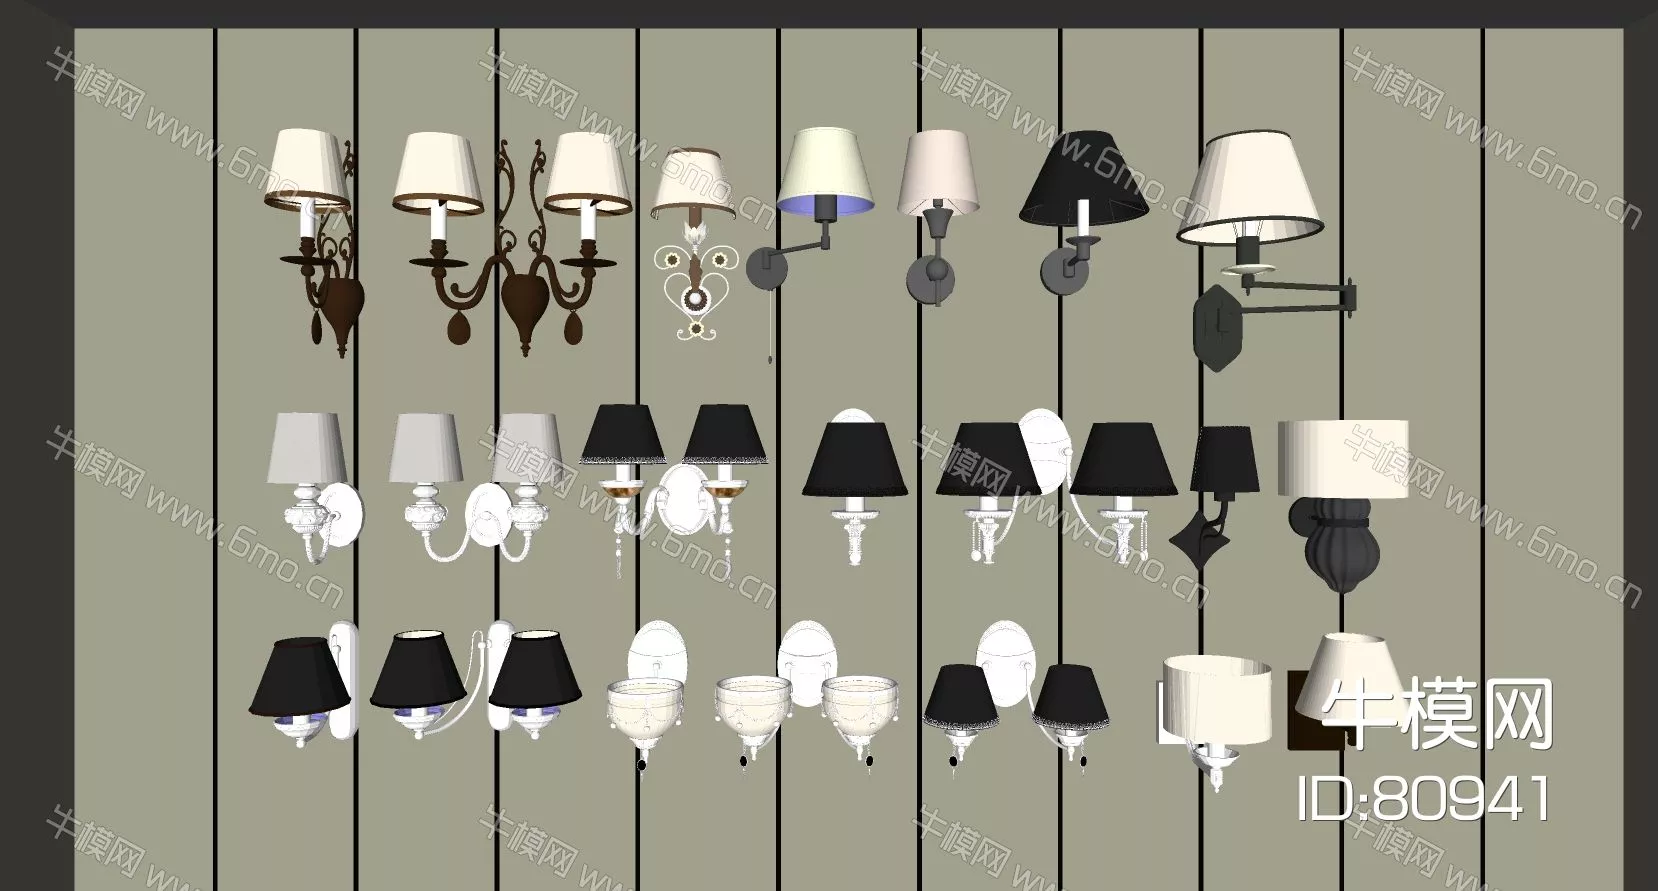 EUROPE WALL LAMP - SKETCHUP 3D MODEL - ENSCAPE - 80941